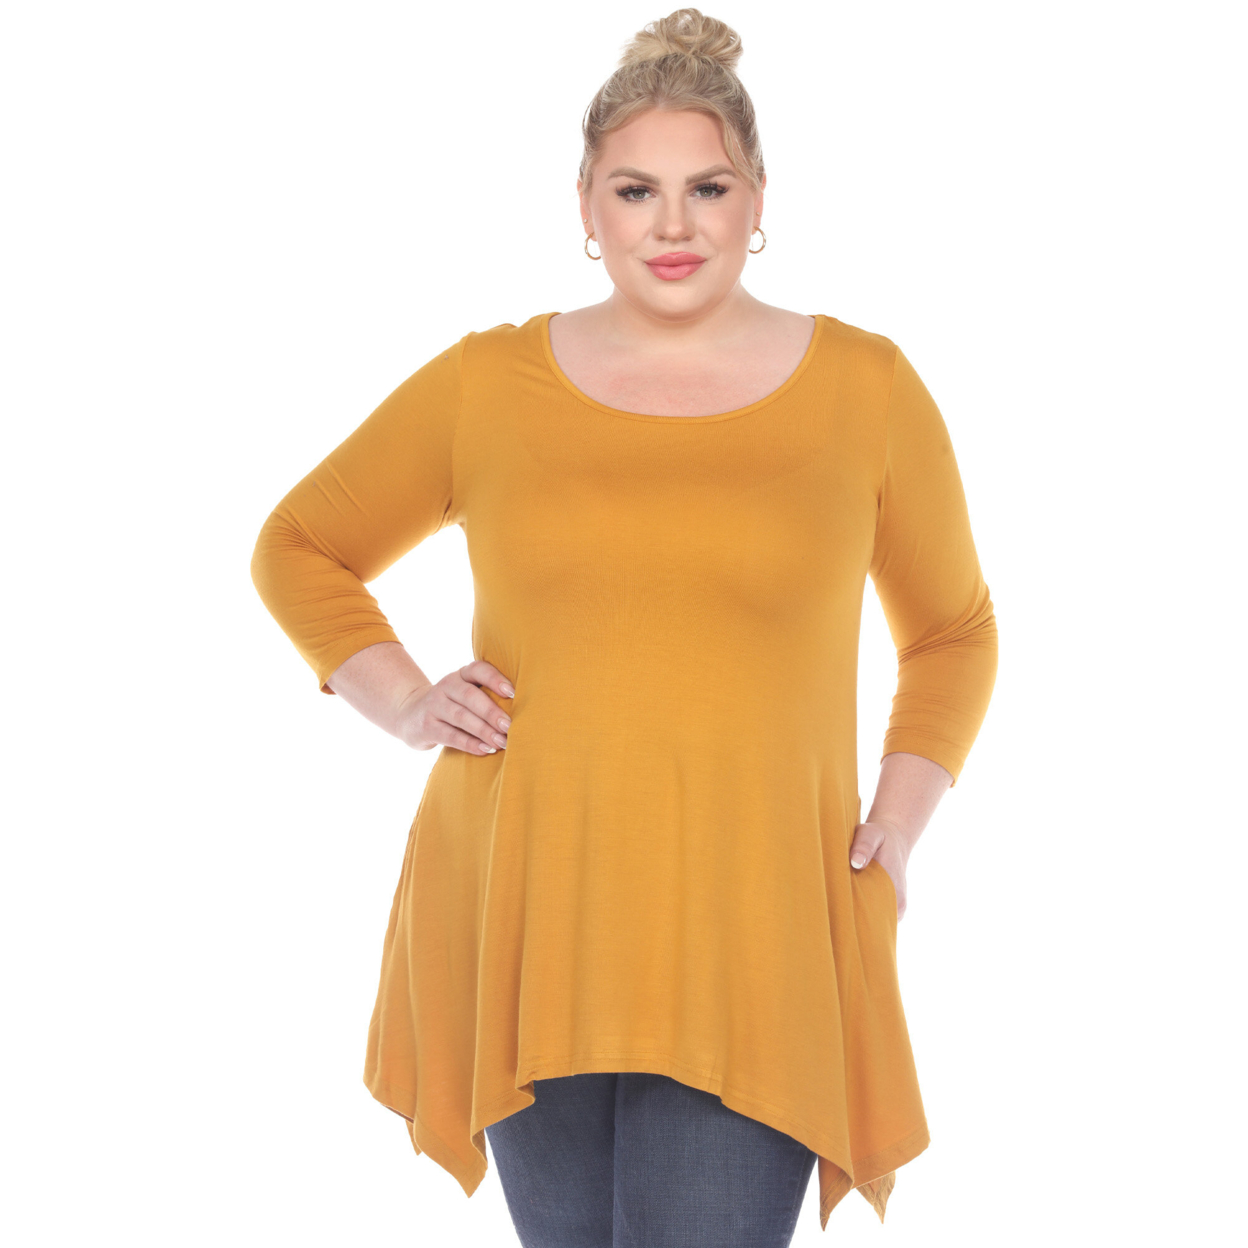 White Mark Women's Quarter Sleeve Tunic Top With Pockets - Mustard, 2X